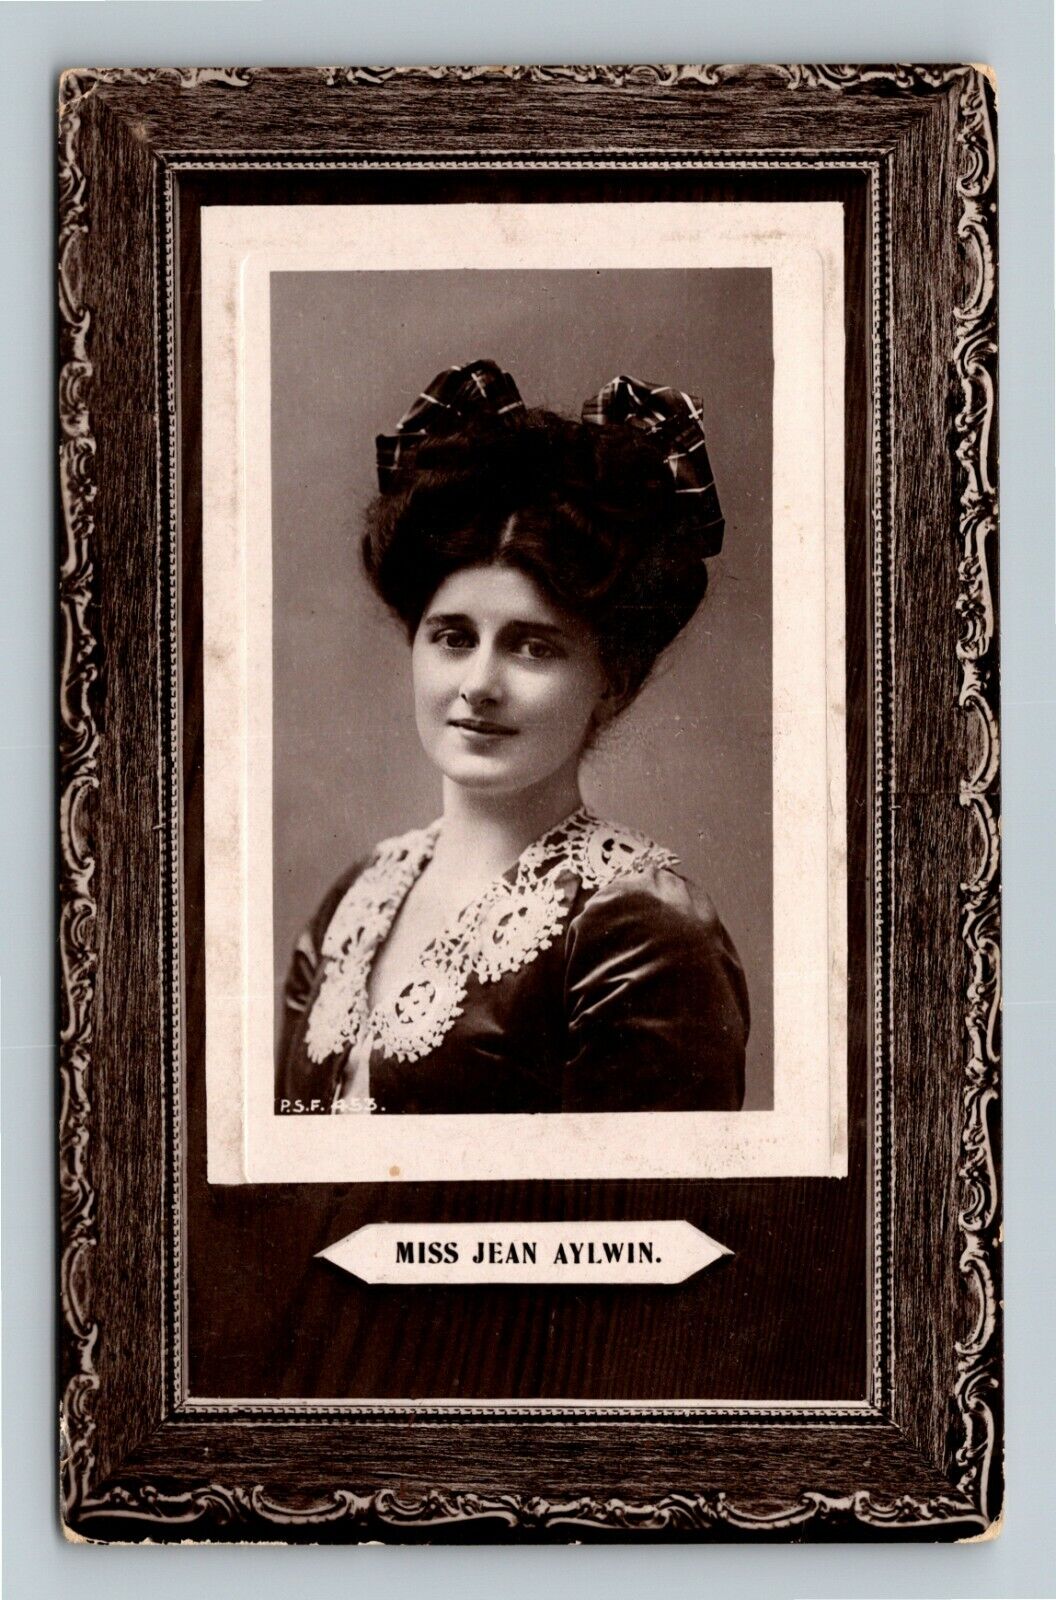 RPPC Miss Jean Aylwin, Scottish Singer And Actress, Real Photo Vintage Postcard